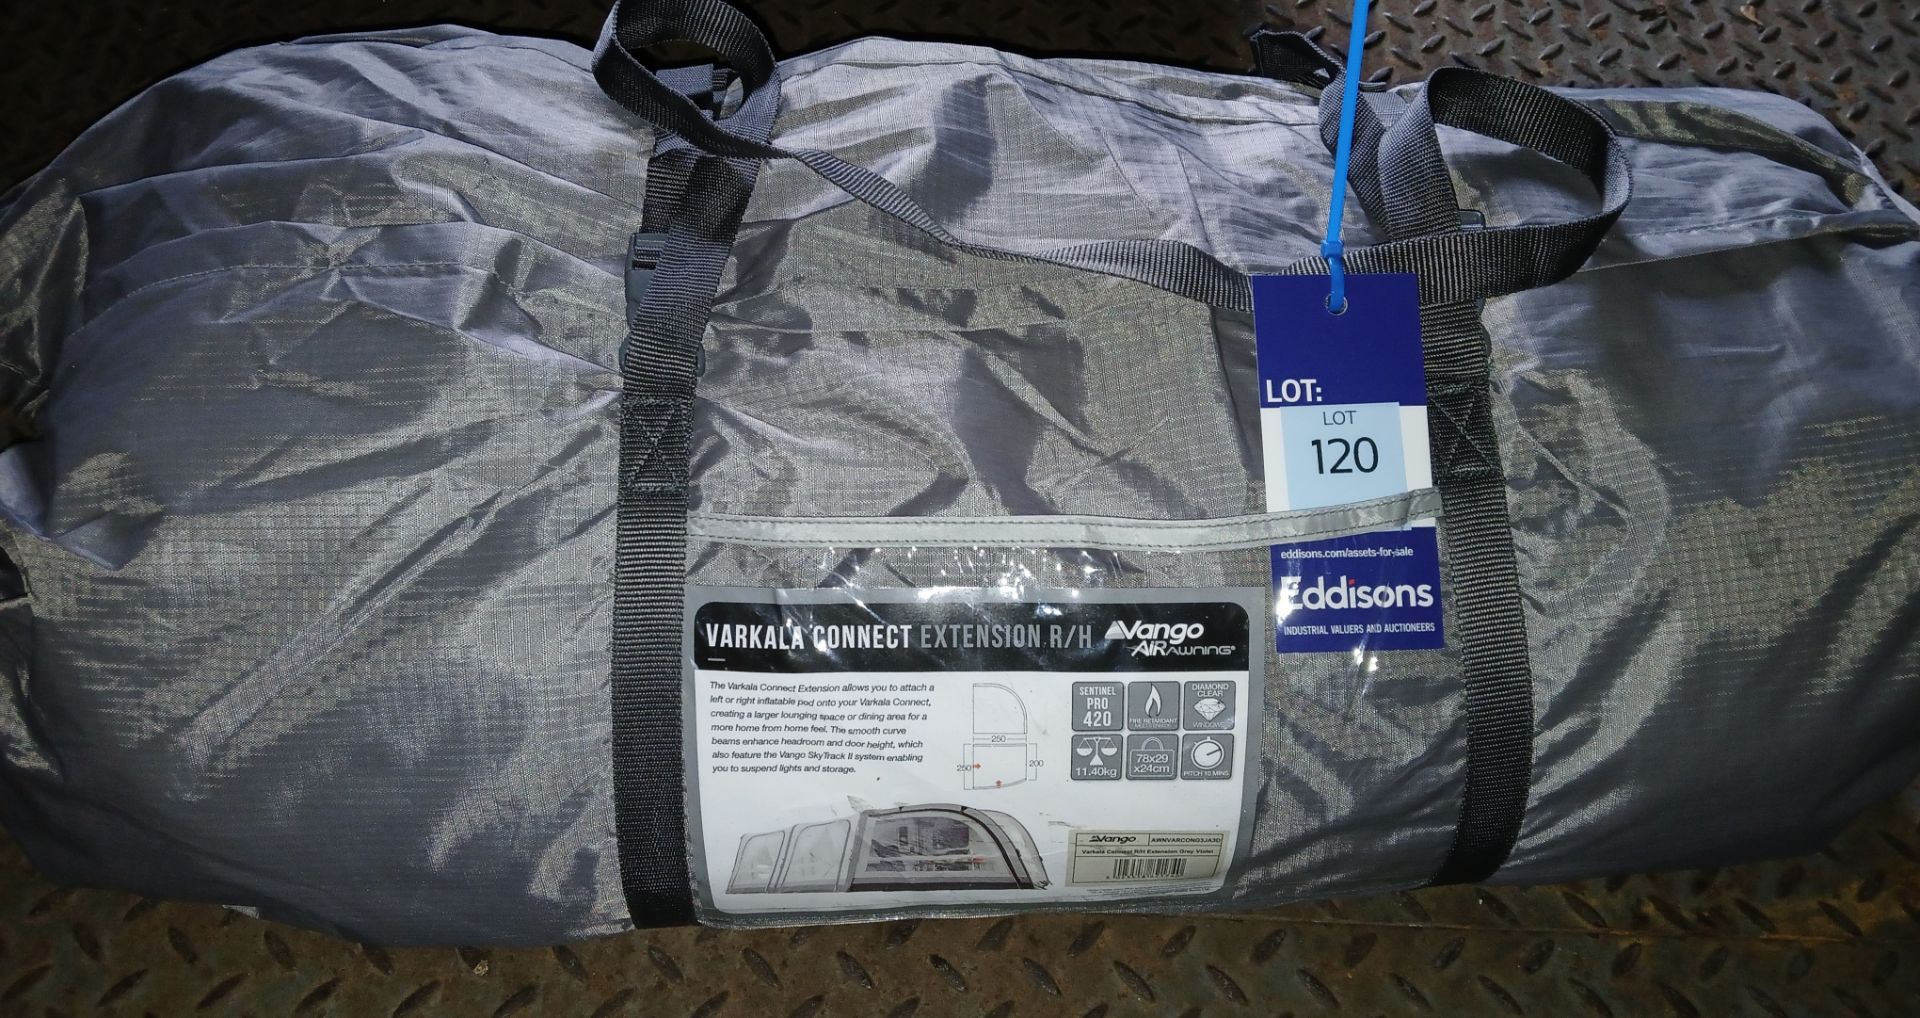 Vango Air Awning Varkala Connect Extension R/H - May be comptaible with Lot 106 (Please note,